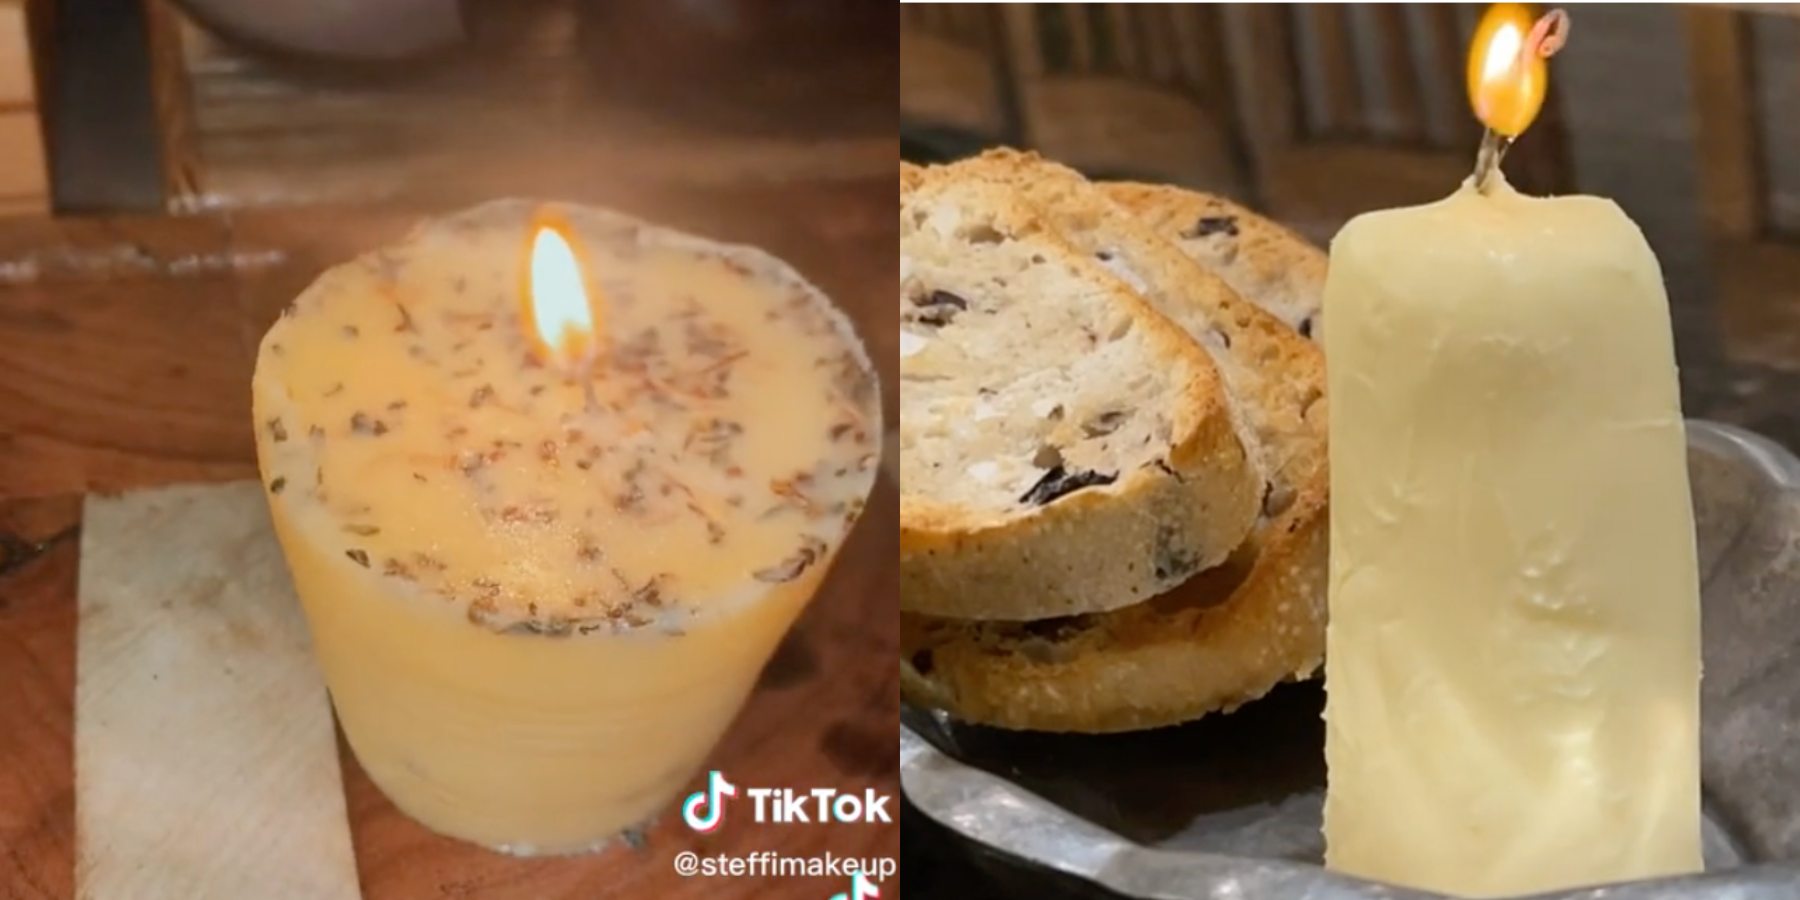 I Tried Making The Viral TikTok Butter Candle & I Didn't Hate It